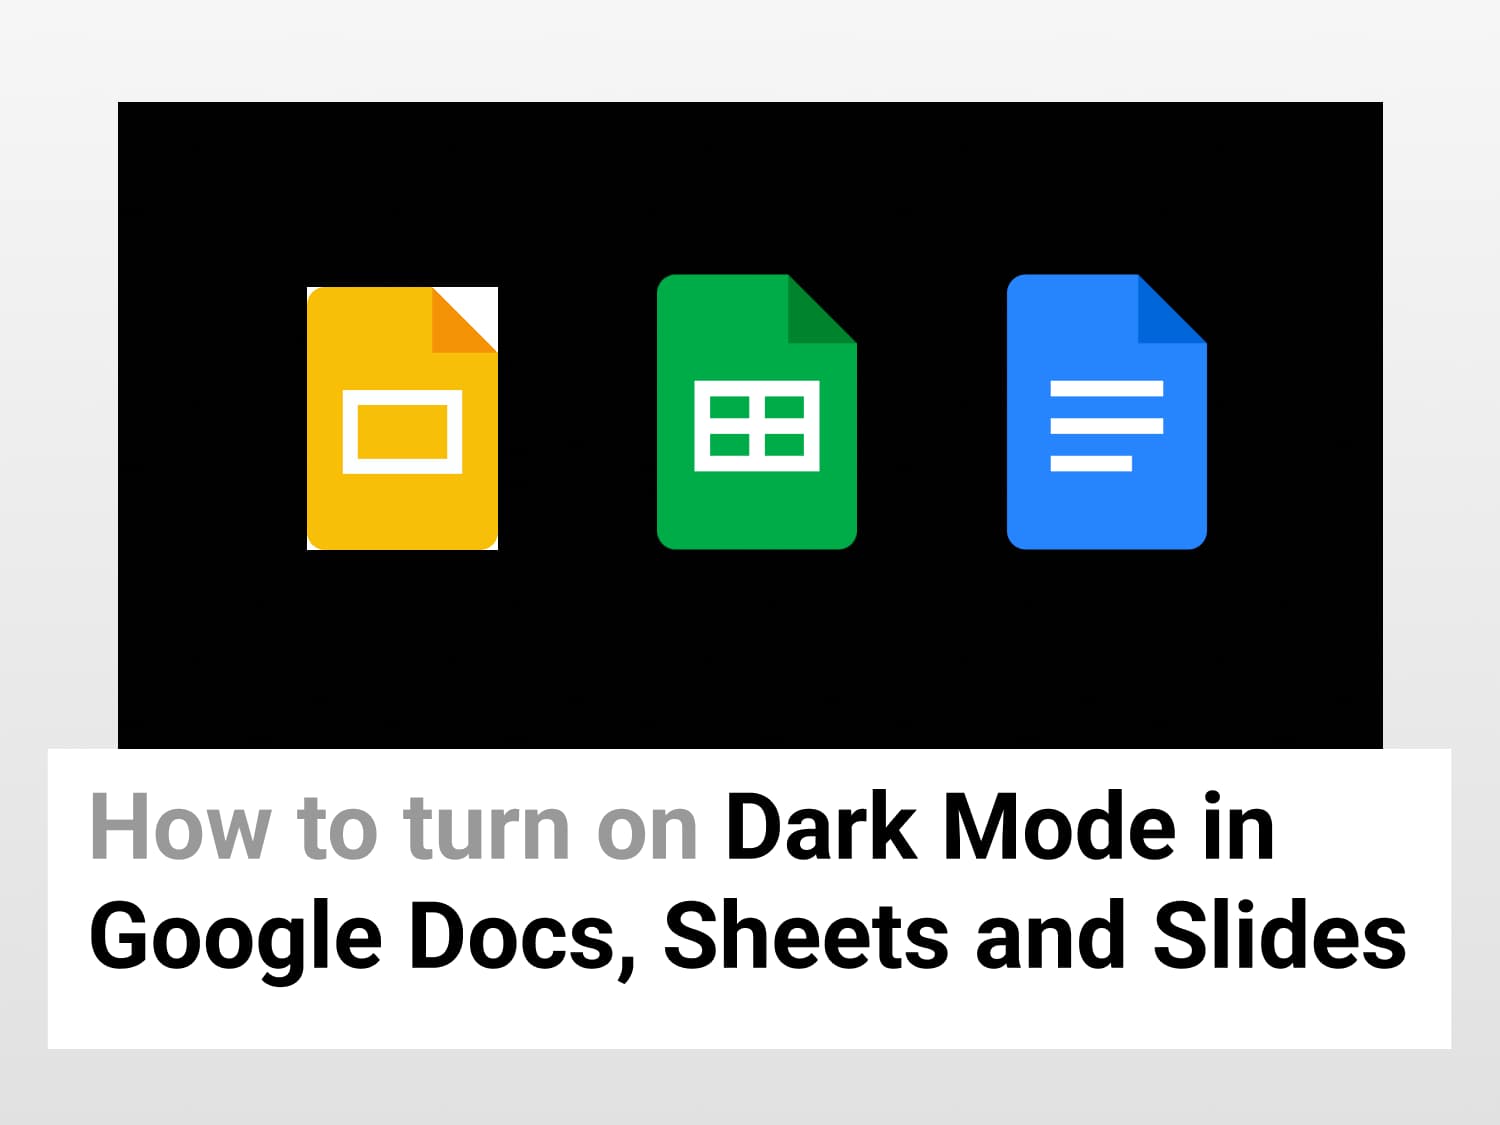 How to use Dark Mode in Google Sheets, Docs and Slides